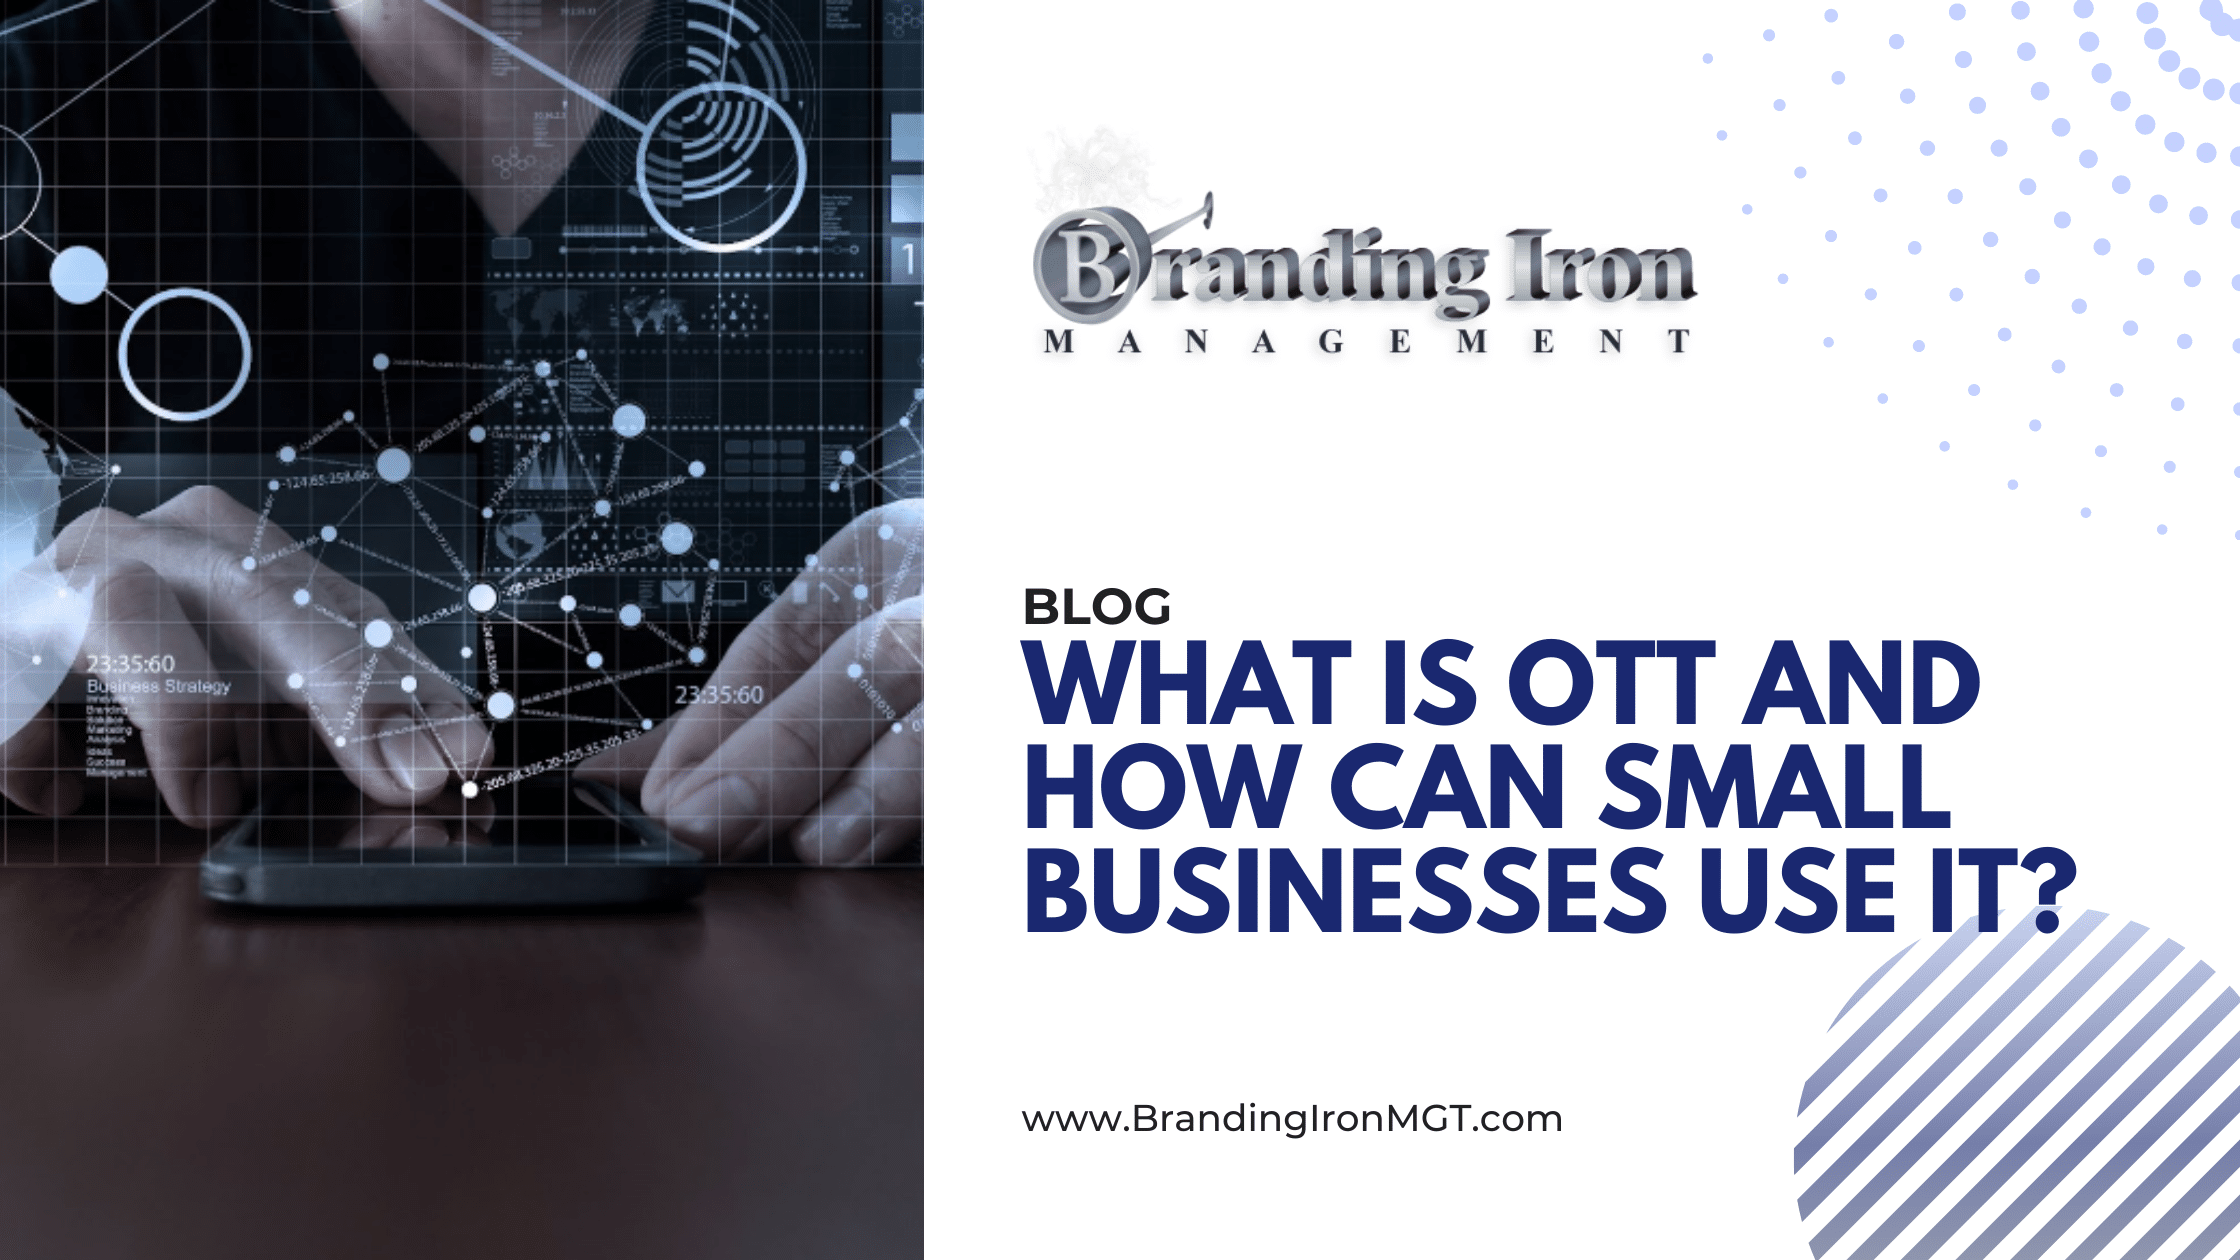 What is OTT and how can small businesses use it?